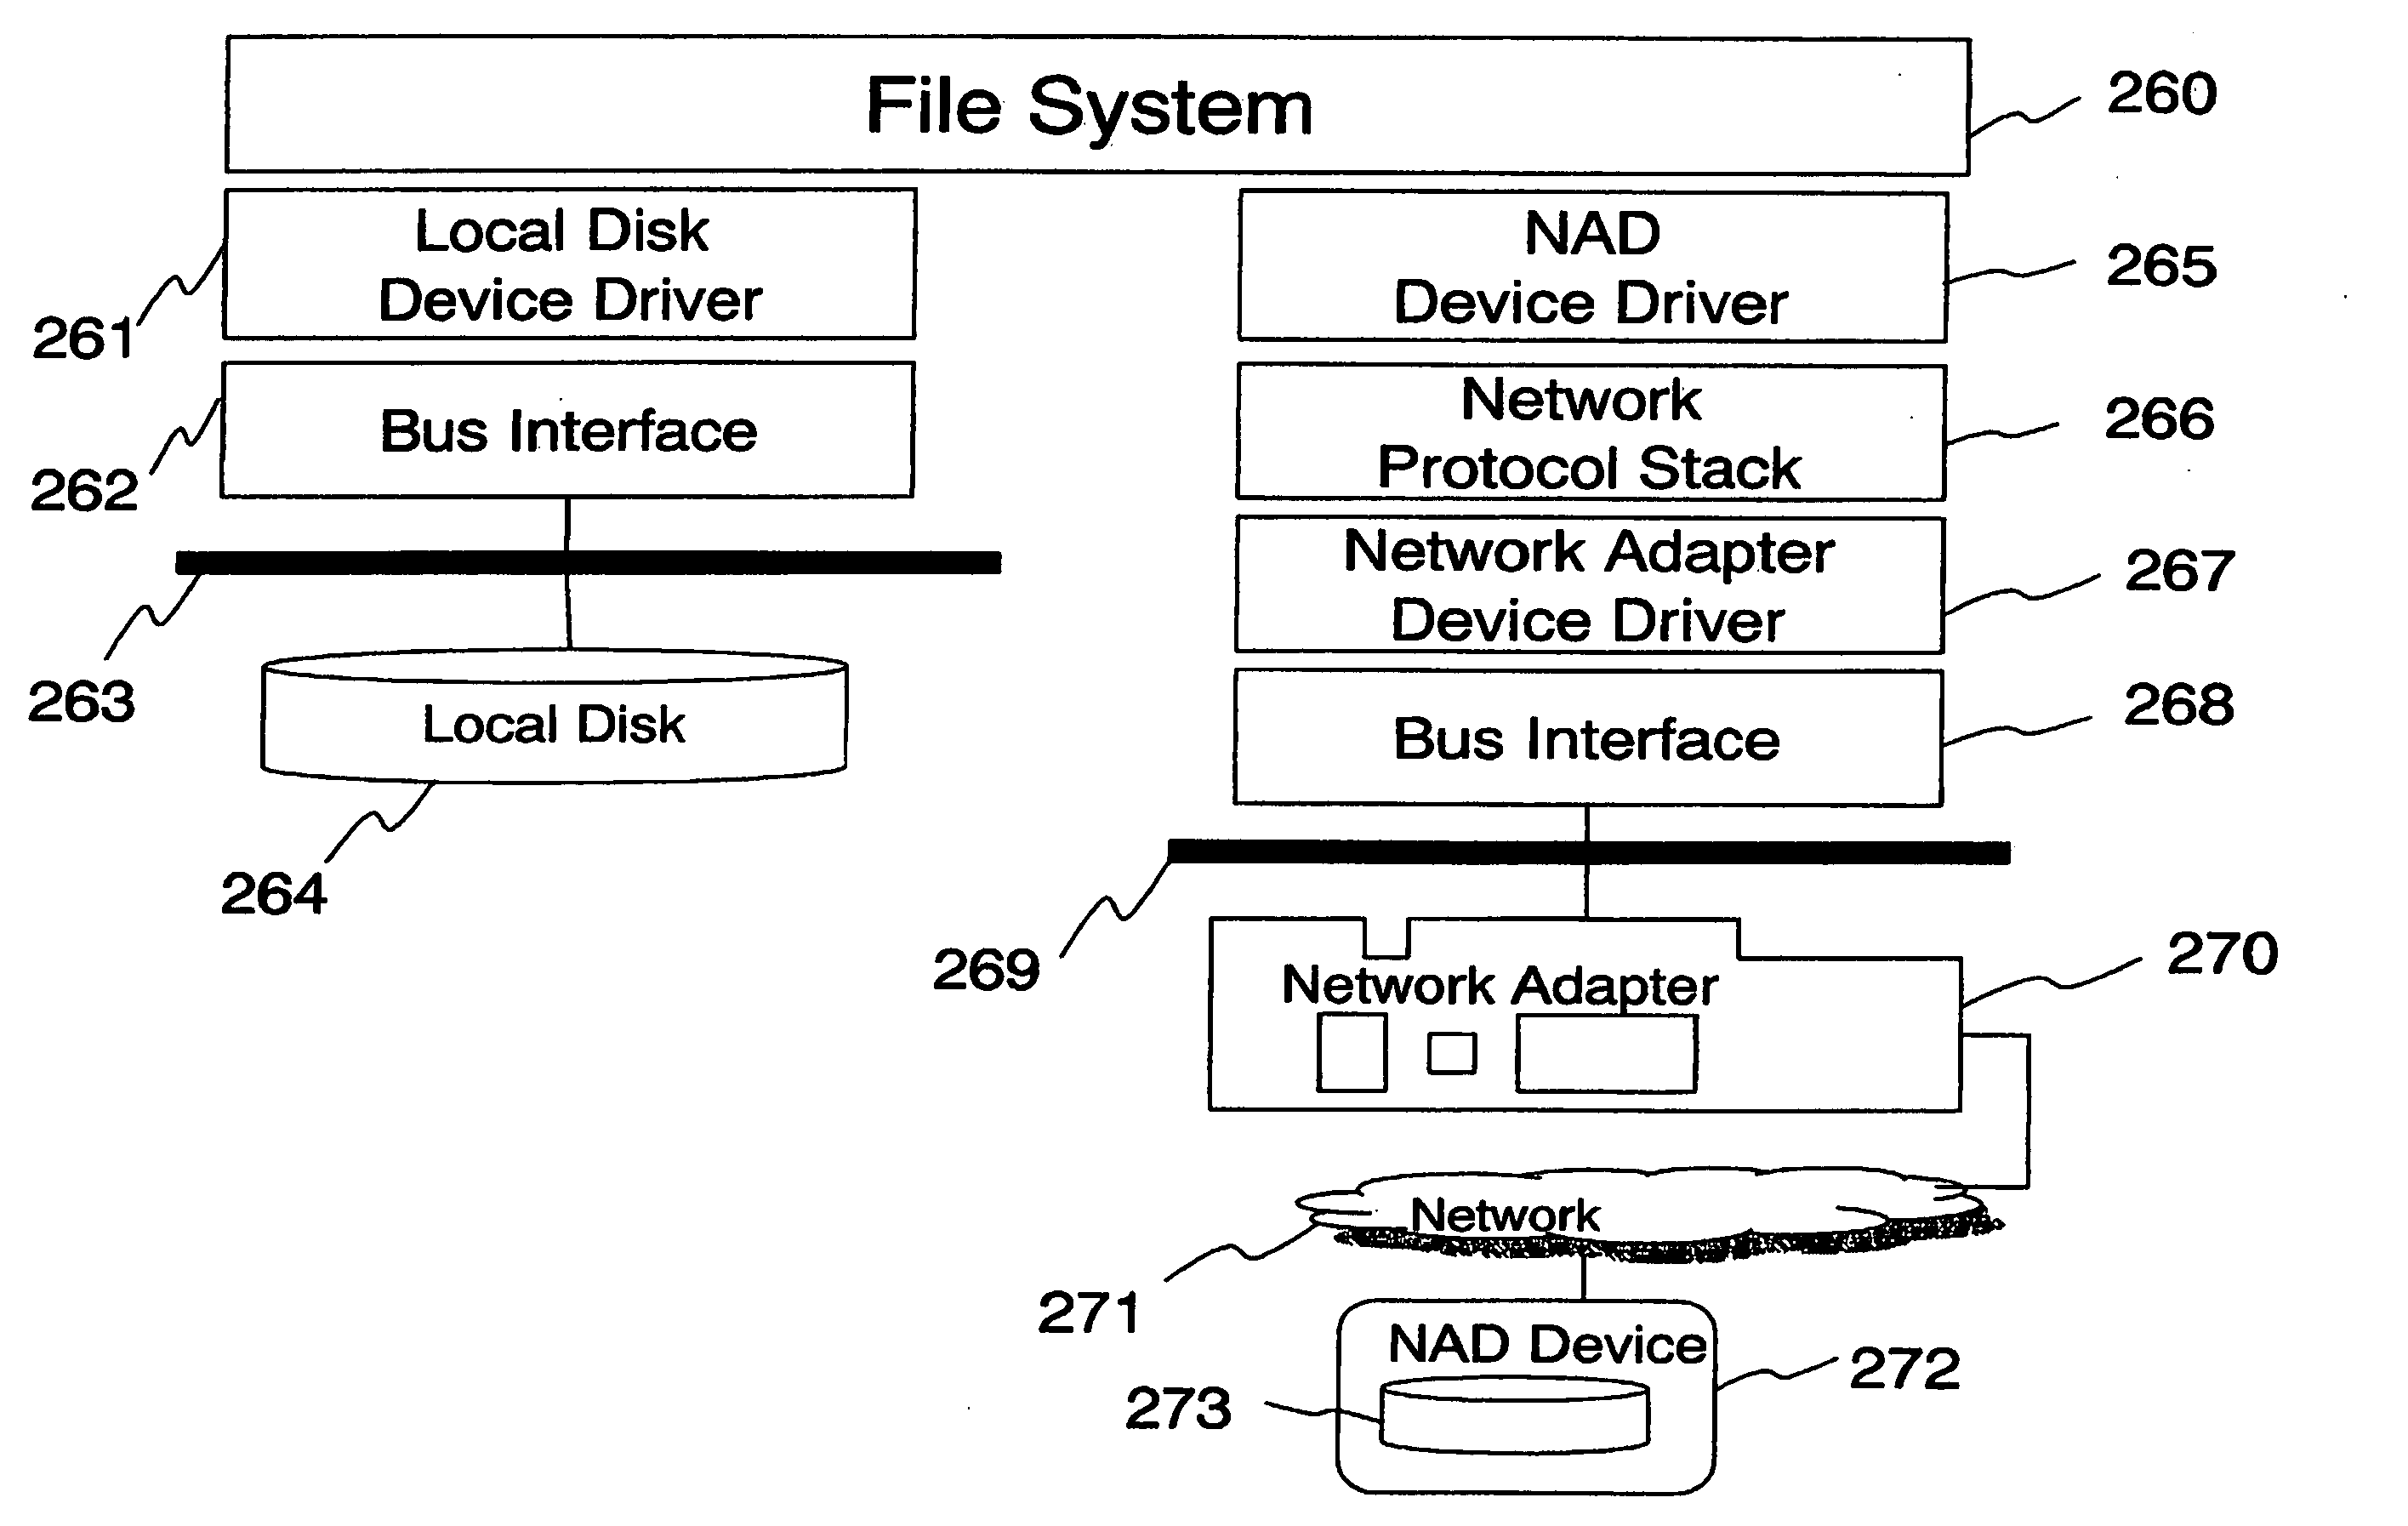 Disk system adapted to be directly attached